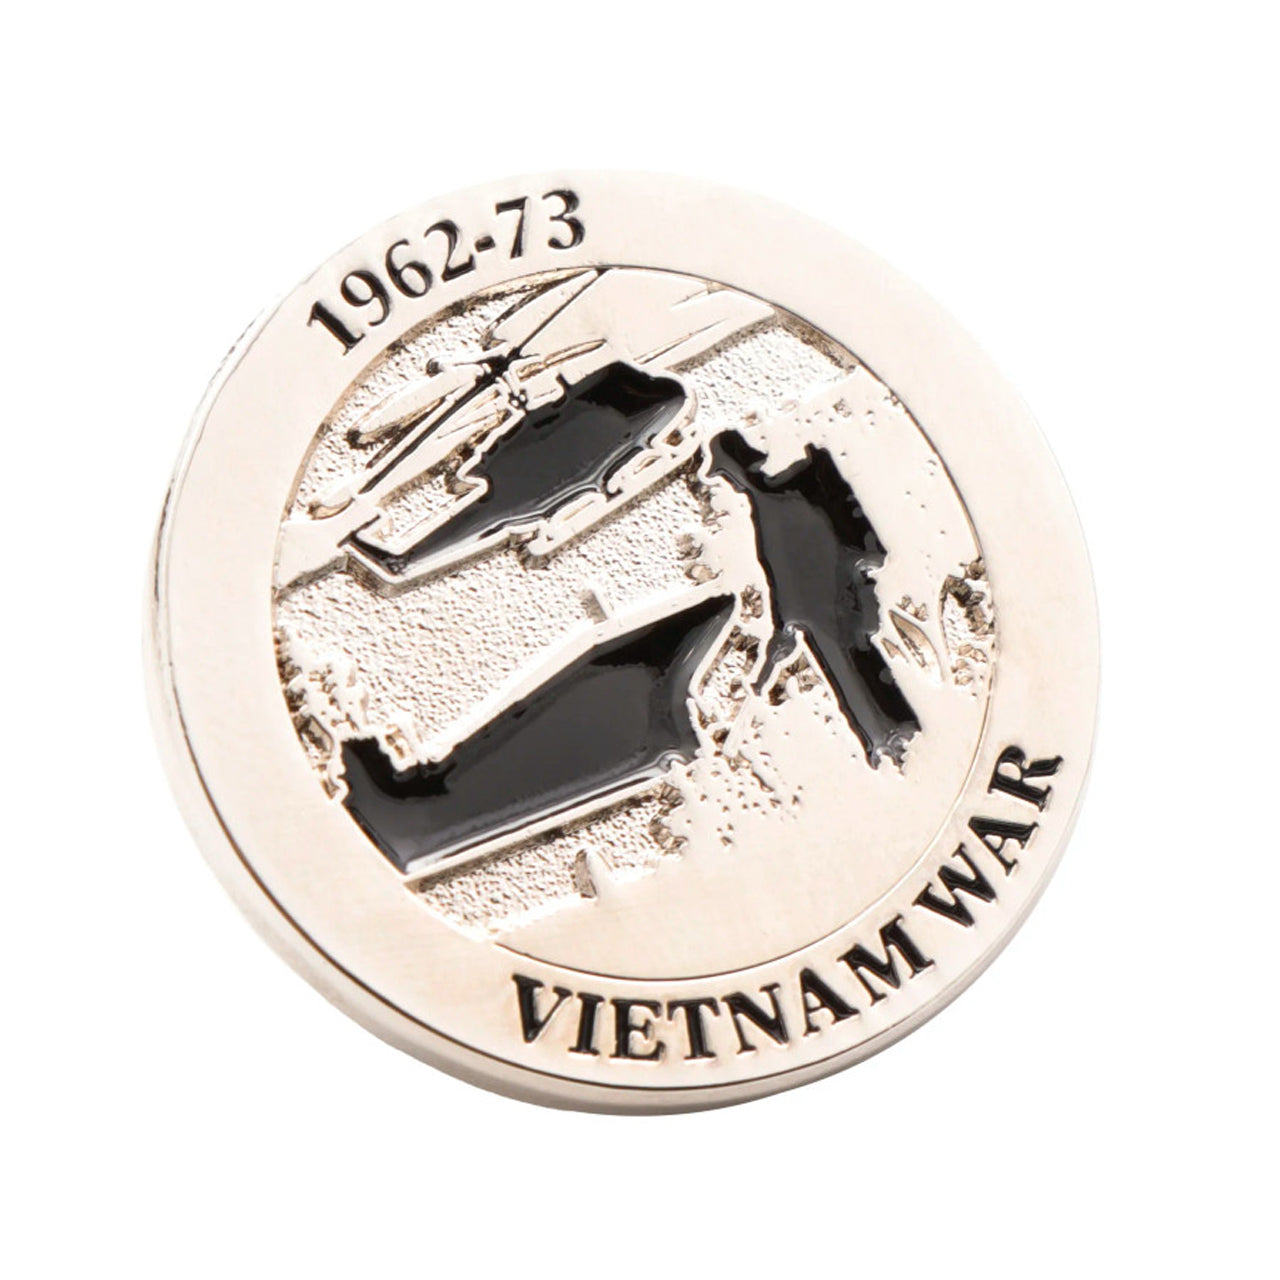 The exceptional Vietnam War Lapel Pin on Card. This stunning 25mm Vietnam War lapel pin features iconic images from Vietnam, with 1962-73 and Vietnam War. Stuck to commemorate the some 60,000 Australians who served in the Vietnam war. The pin comes on a presentation card and has a butterfly clip on the back. www.moralepatches.com.au